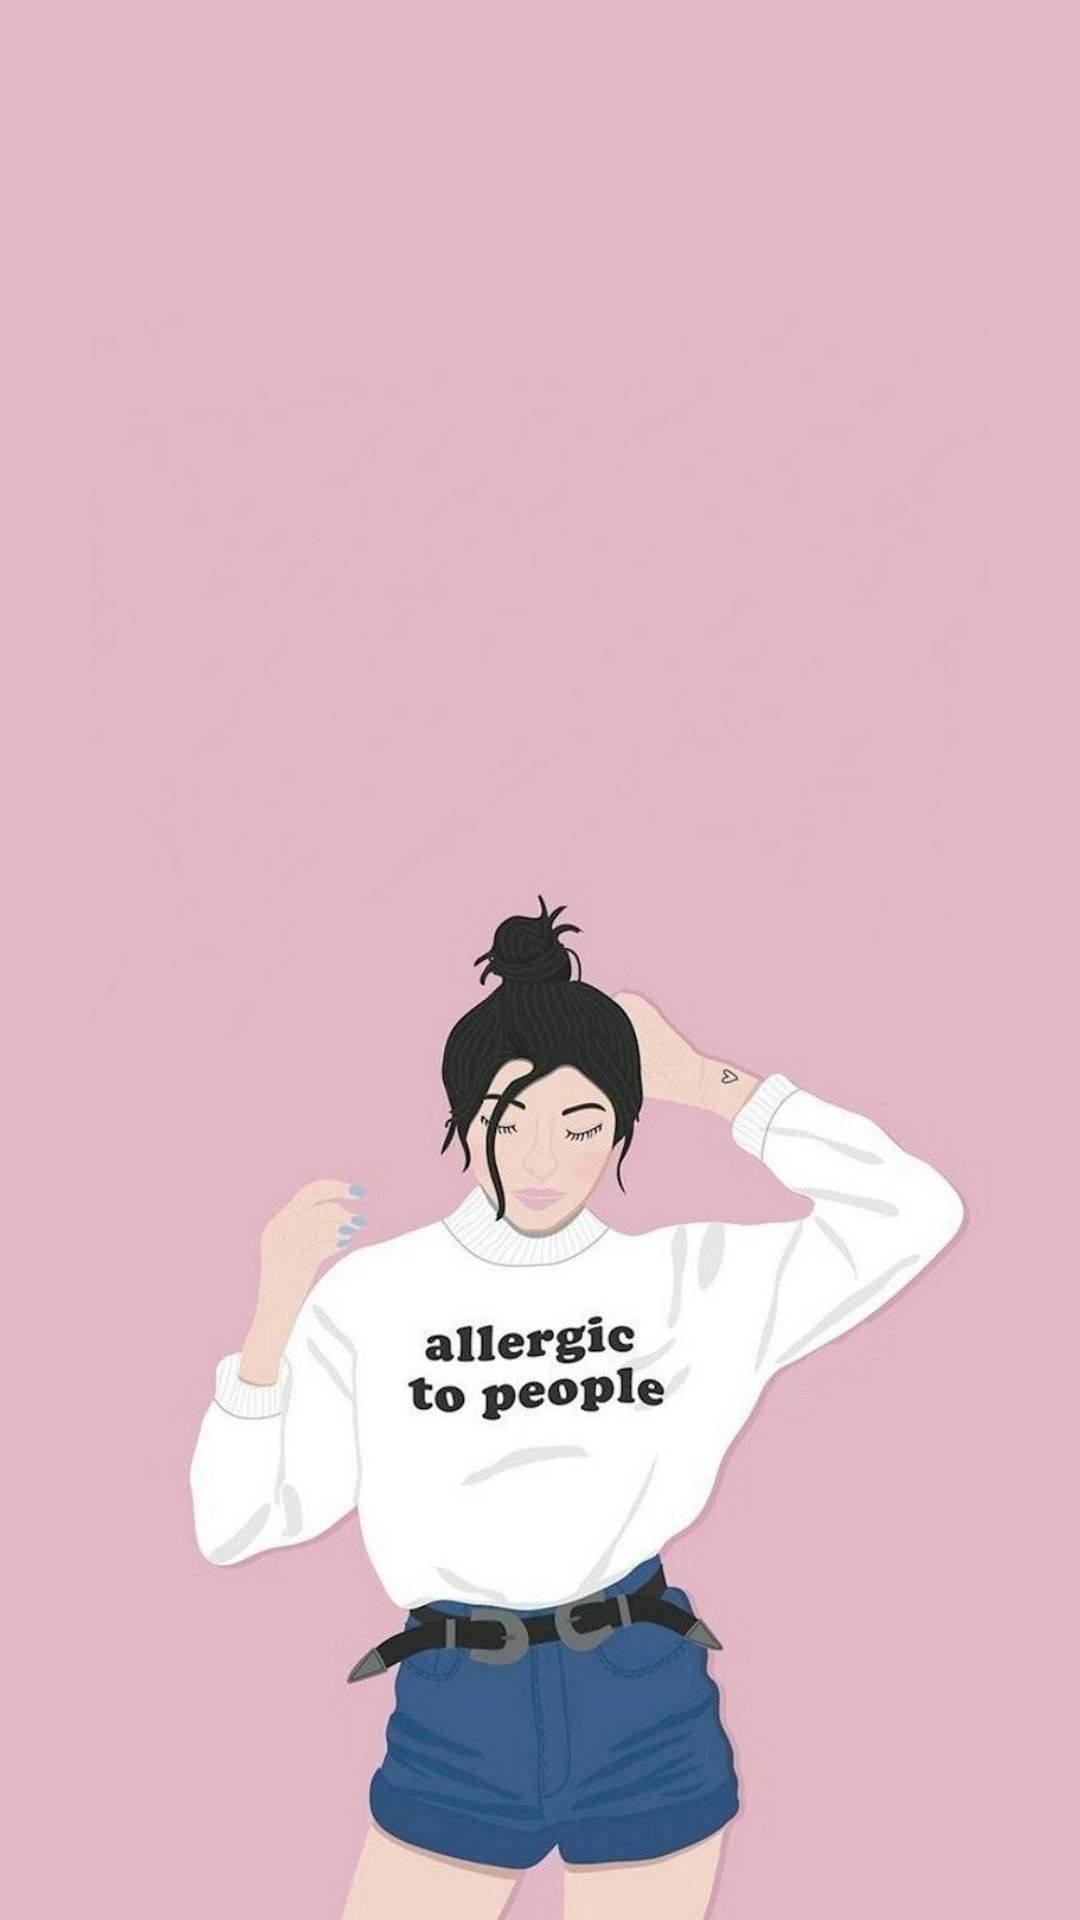 IPhone wallpaper of a cartoon girl with a white sweater that says 